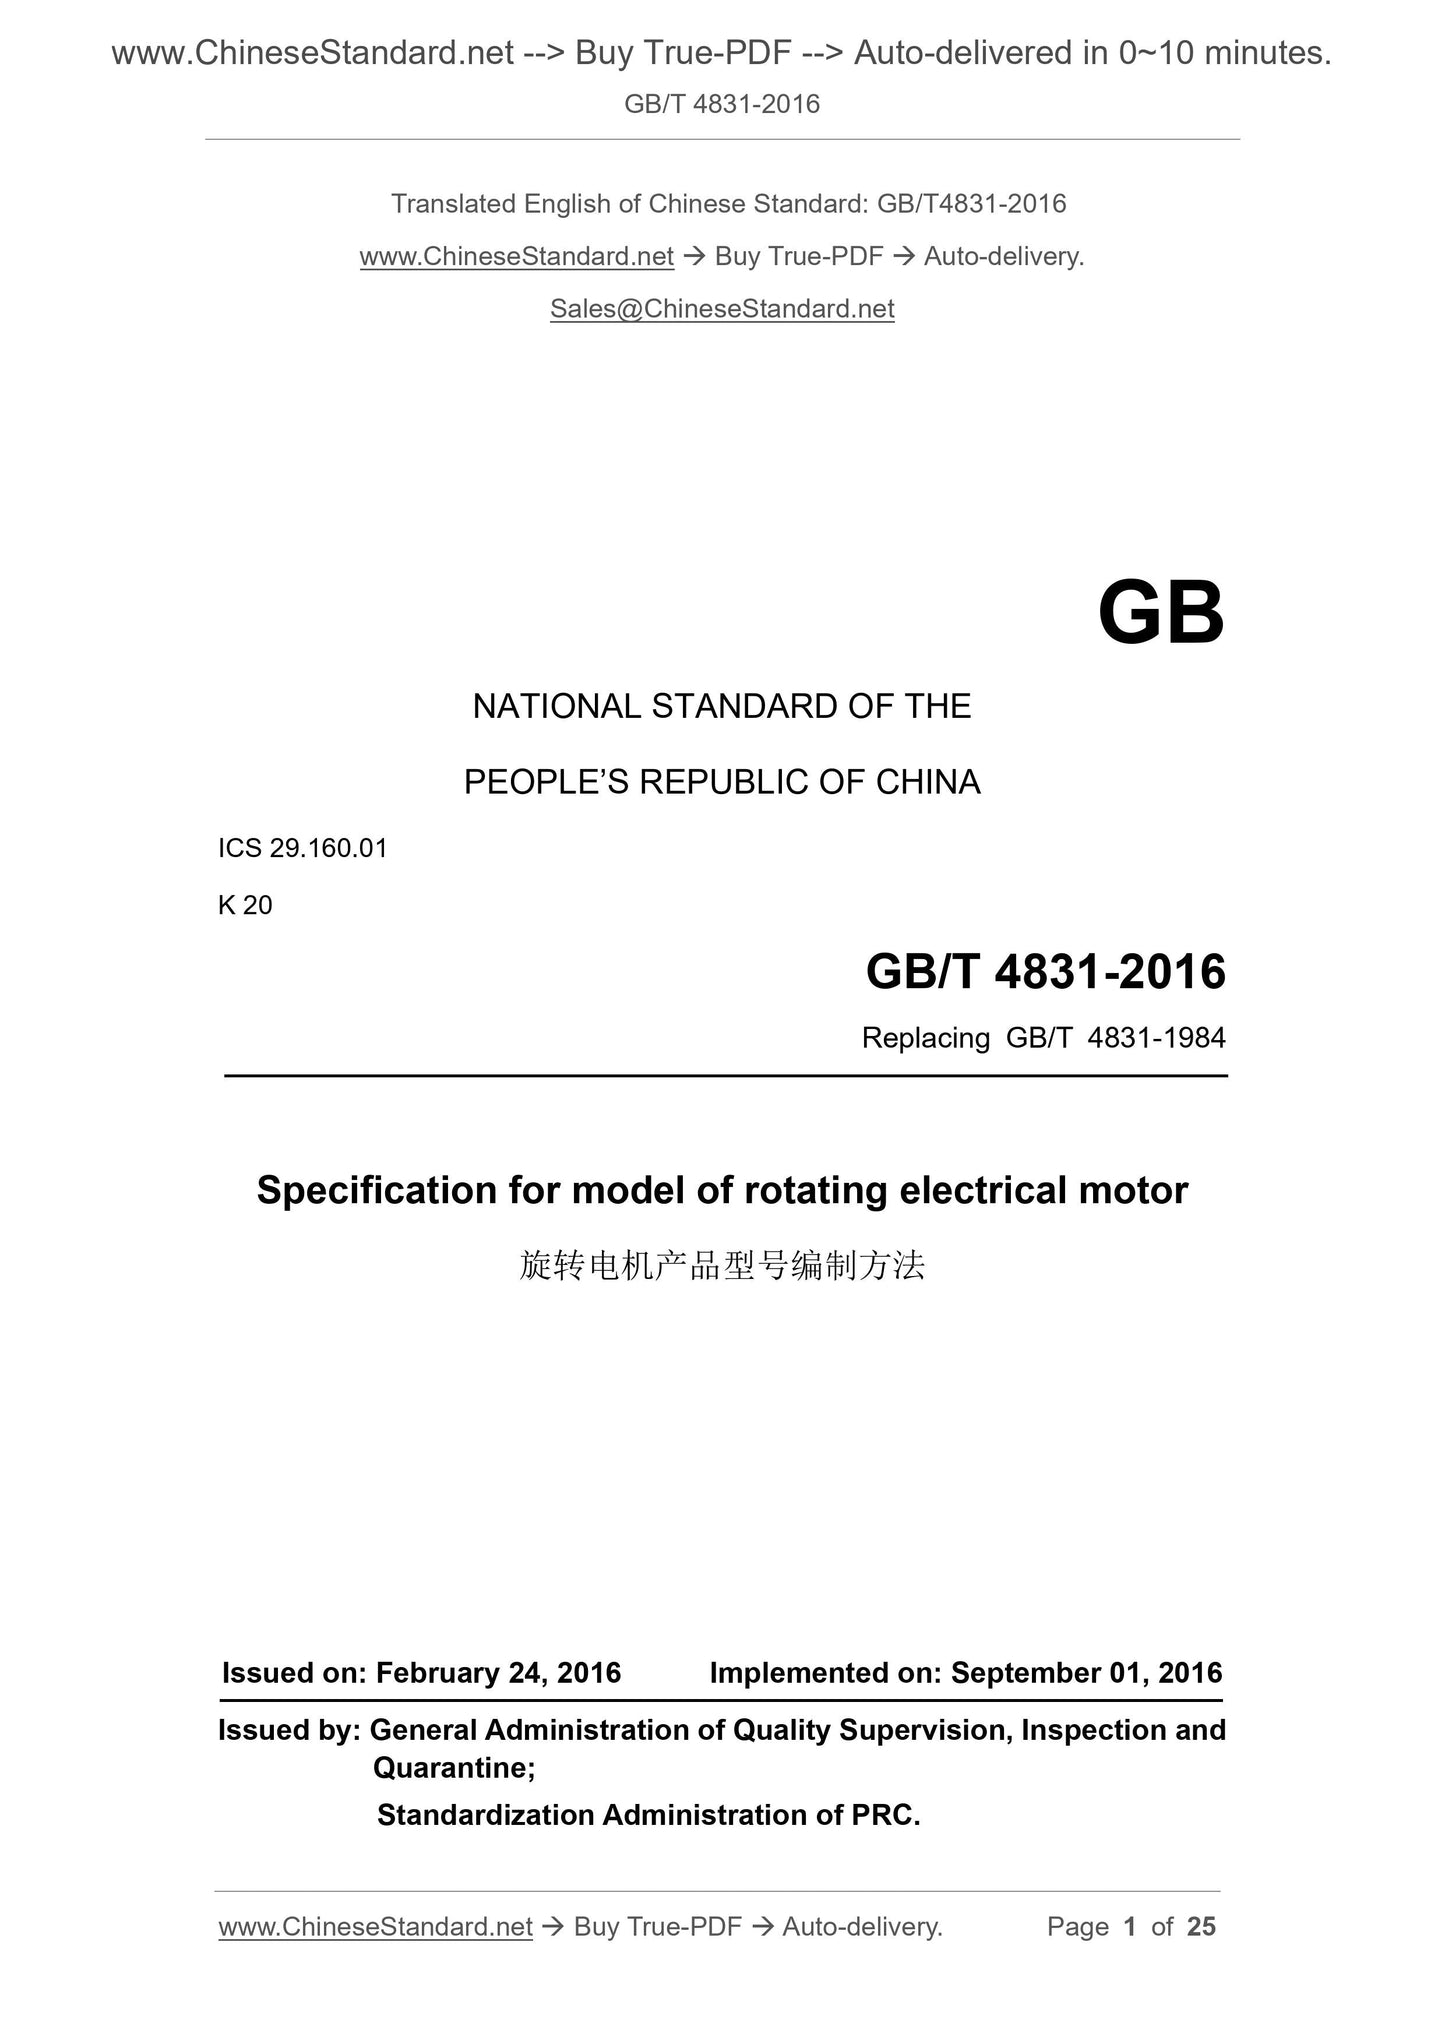 GB/T 4831-2016 Page 1